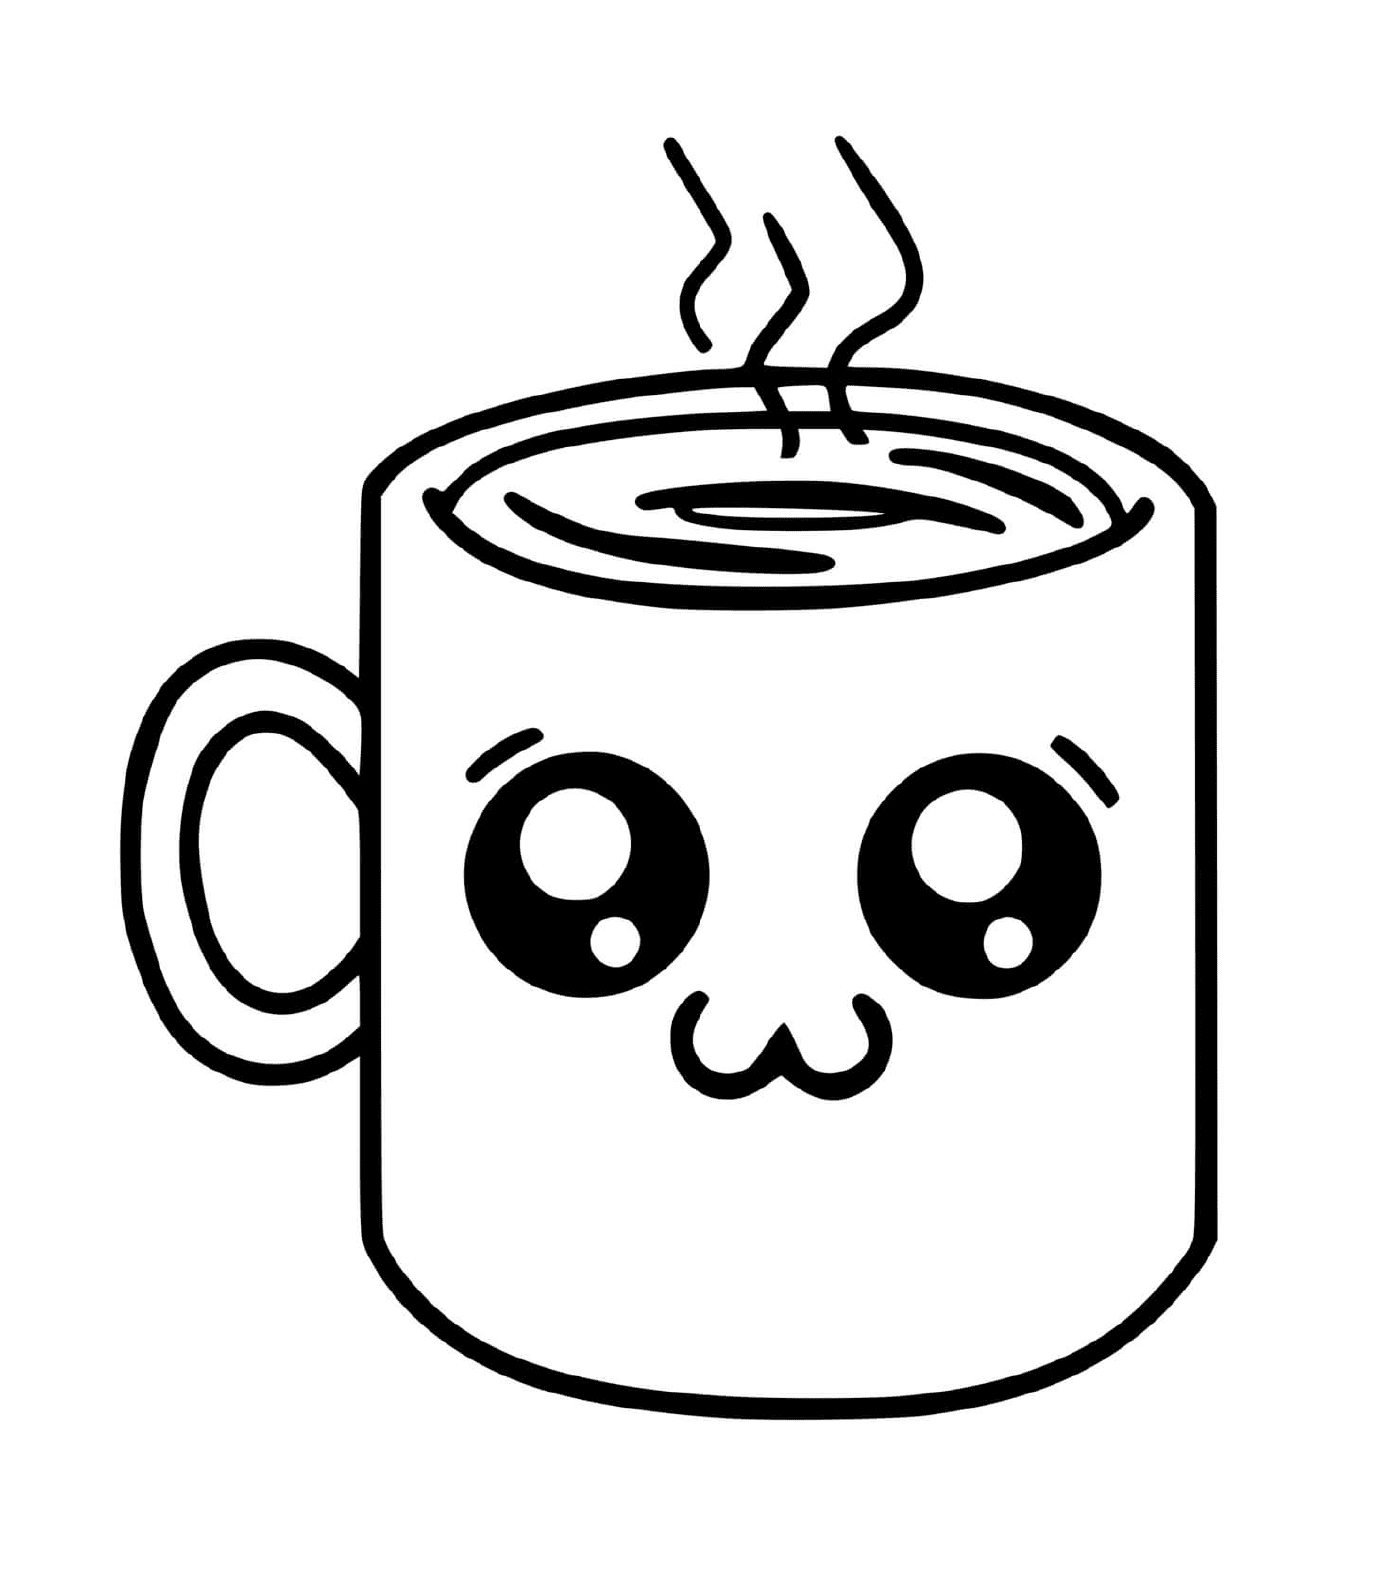  A cup of cute coffee 